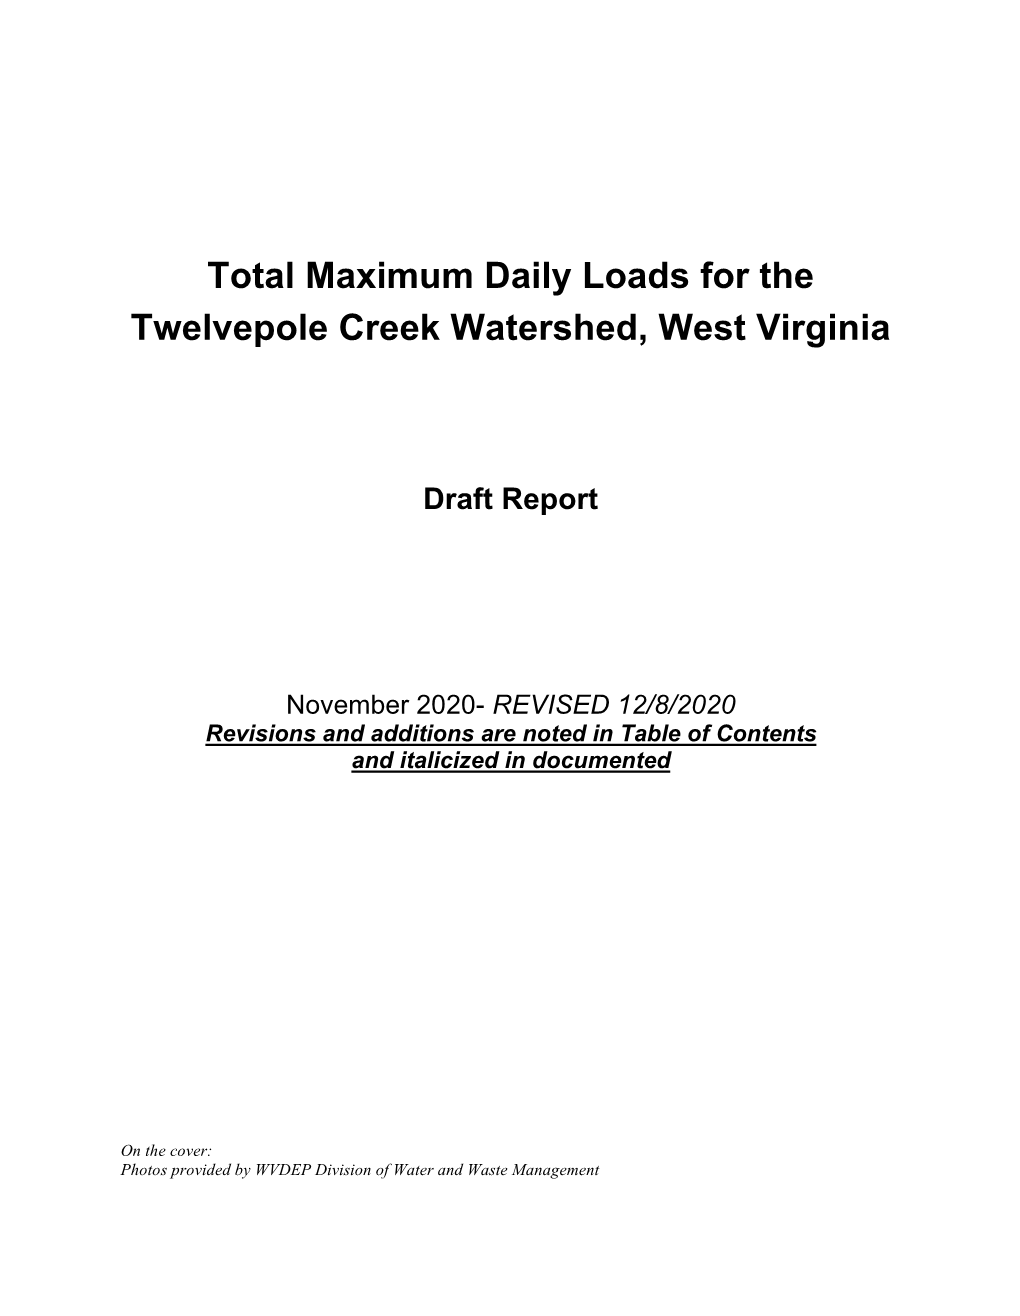 Total Maximum Daily Loads for the Twelvepole Creek Watershed, West Virginia